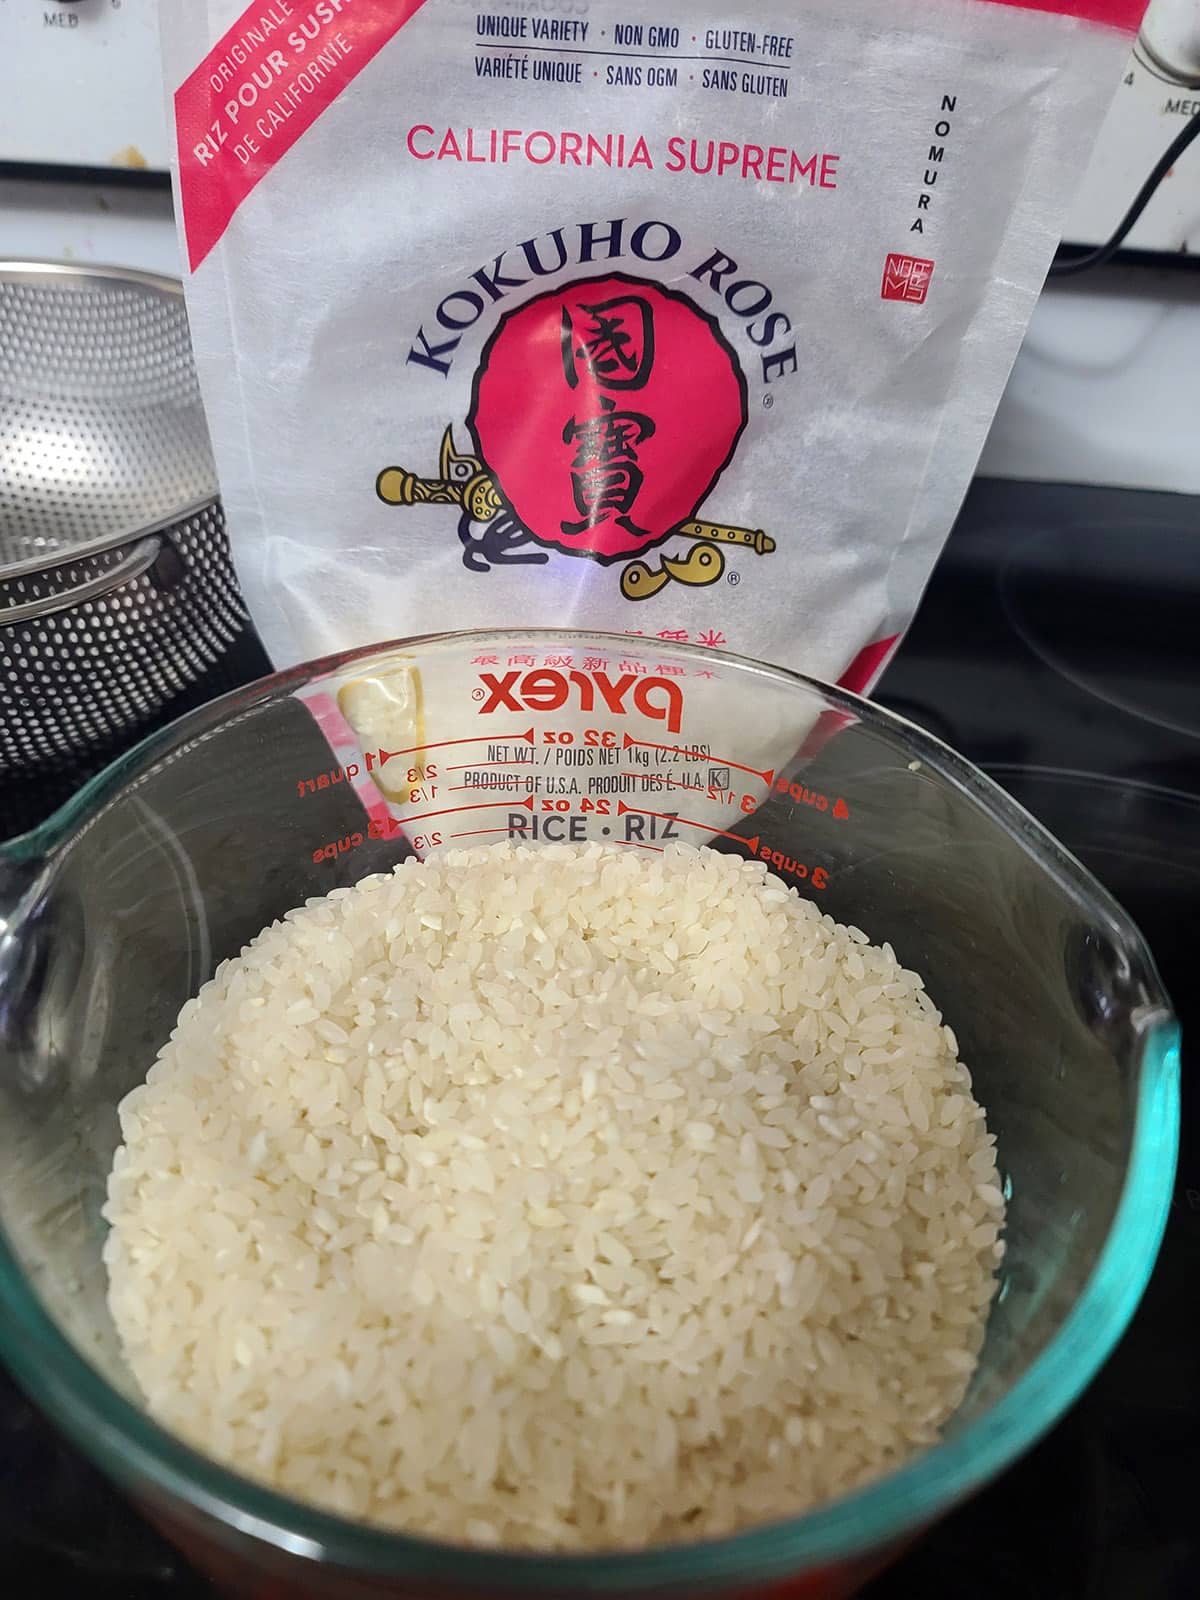 A large measuring cup of short grain rice in front of the bag of Kokuho rice it came out of.